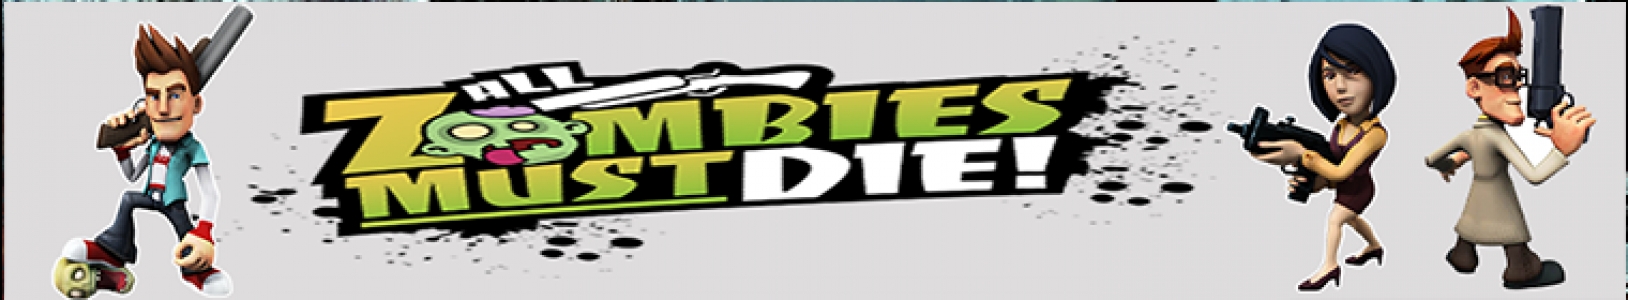 All Zombies Must Die! banner